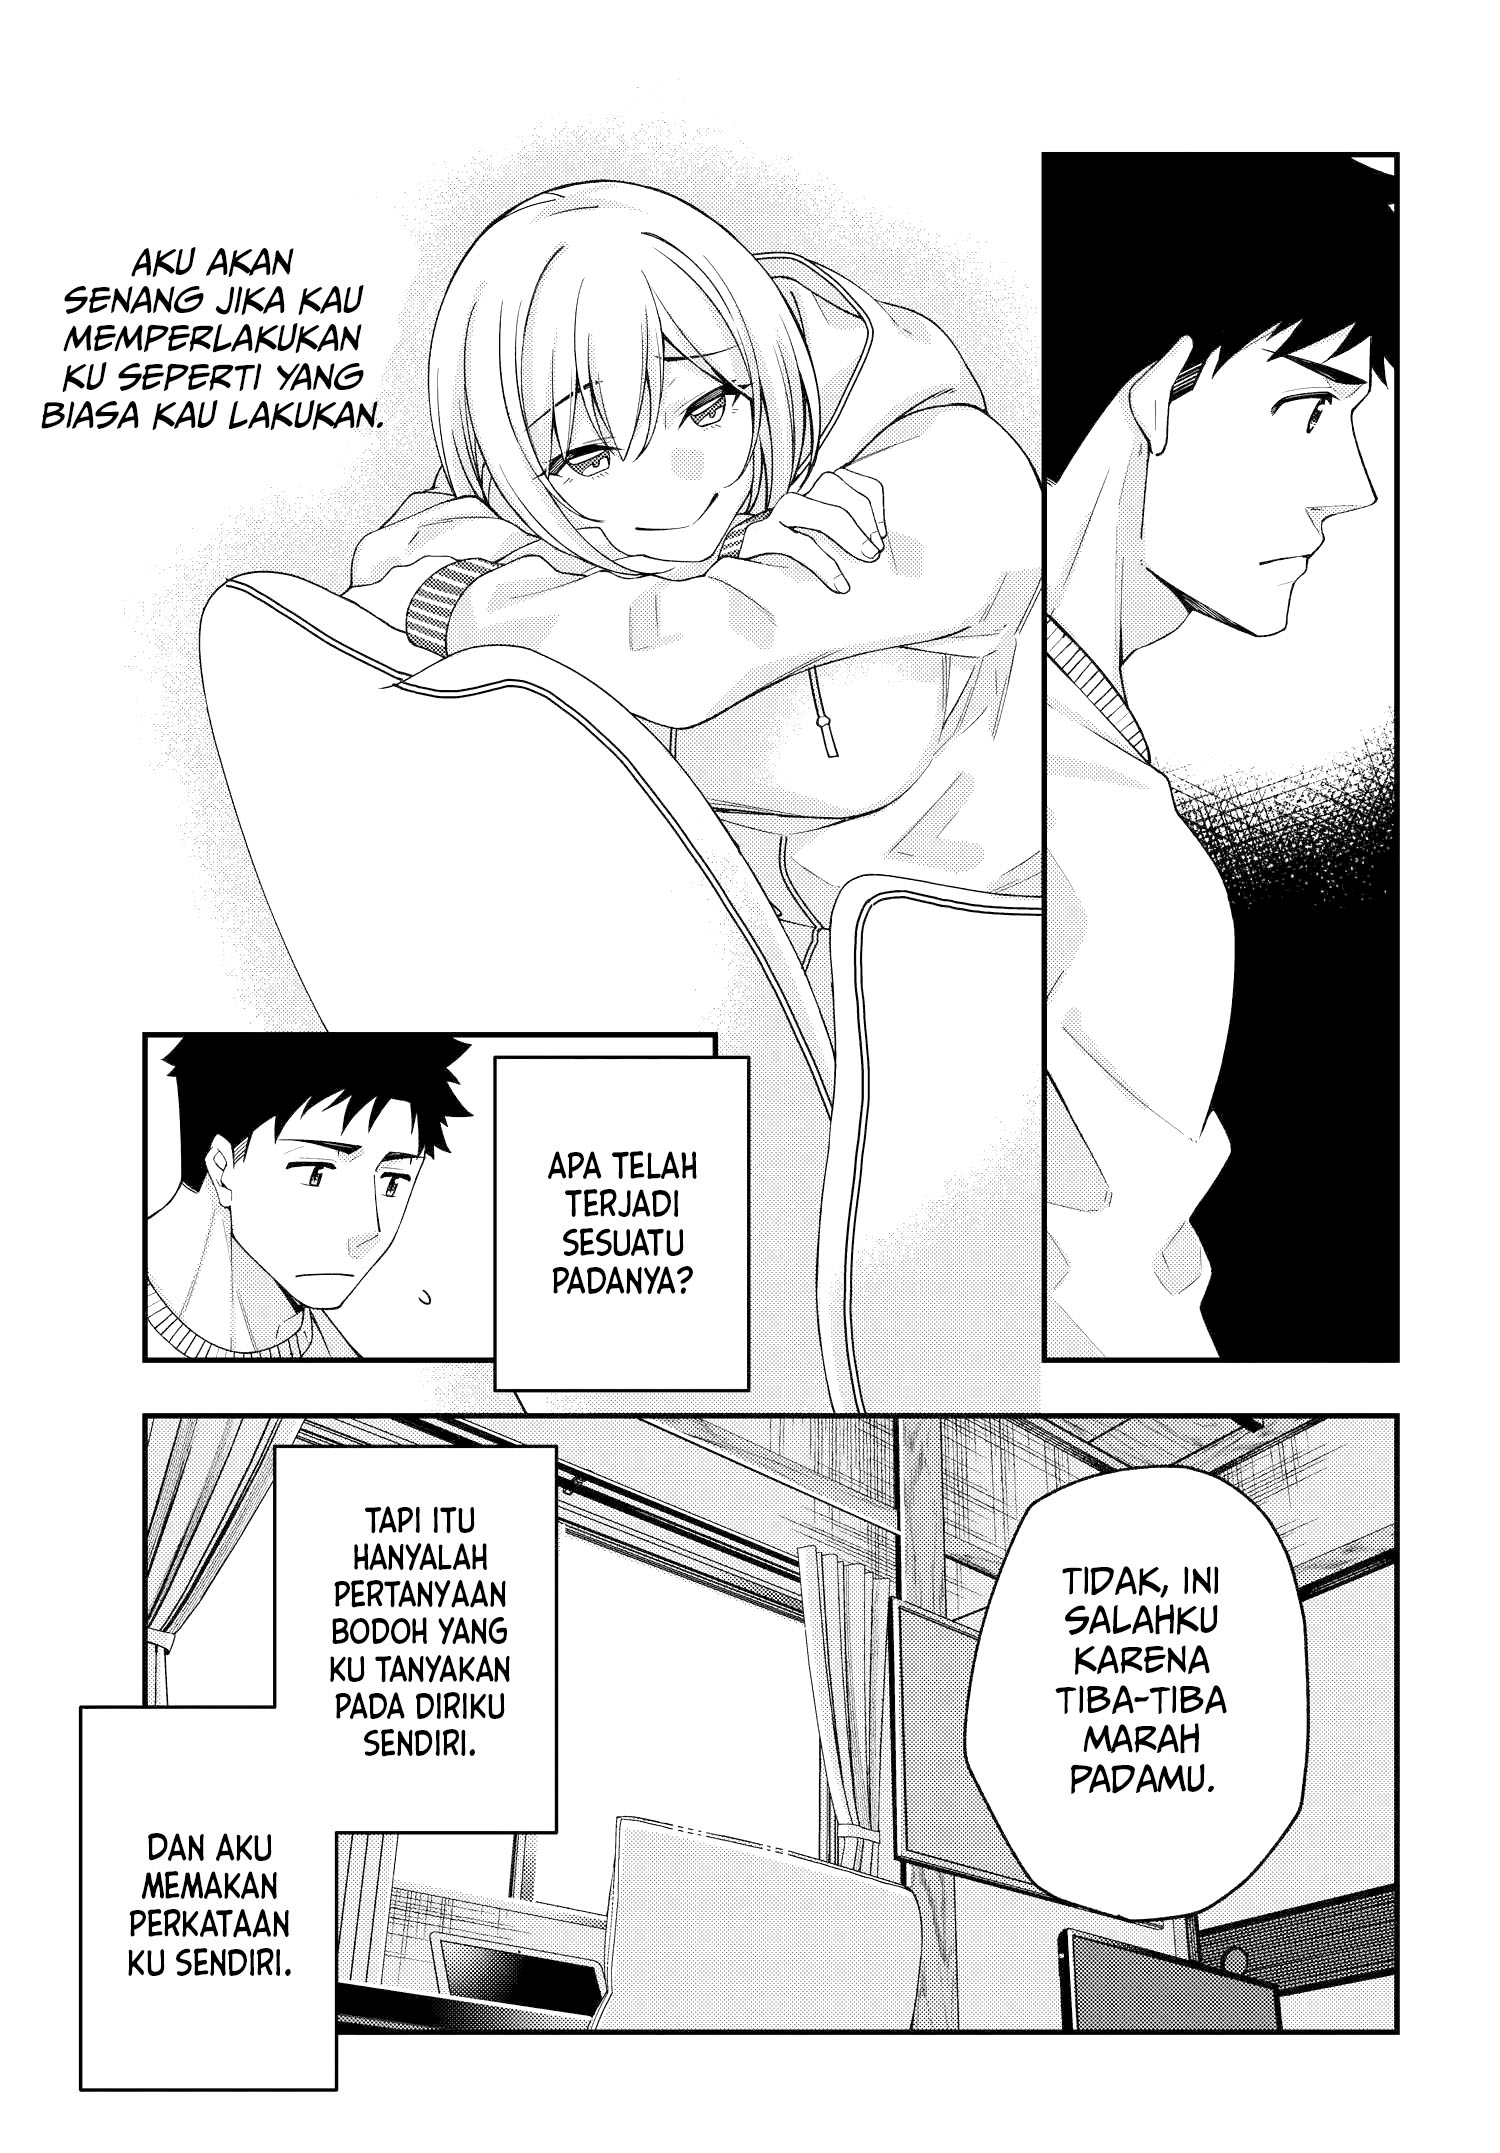 A Choice of Boyfriend and Girlfriend Chapter 02 30